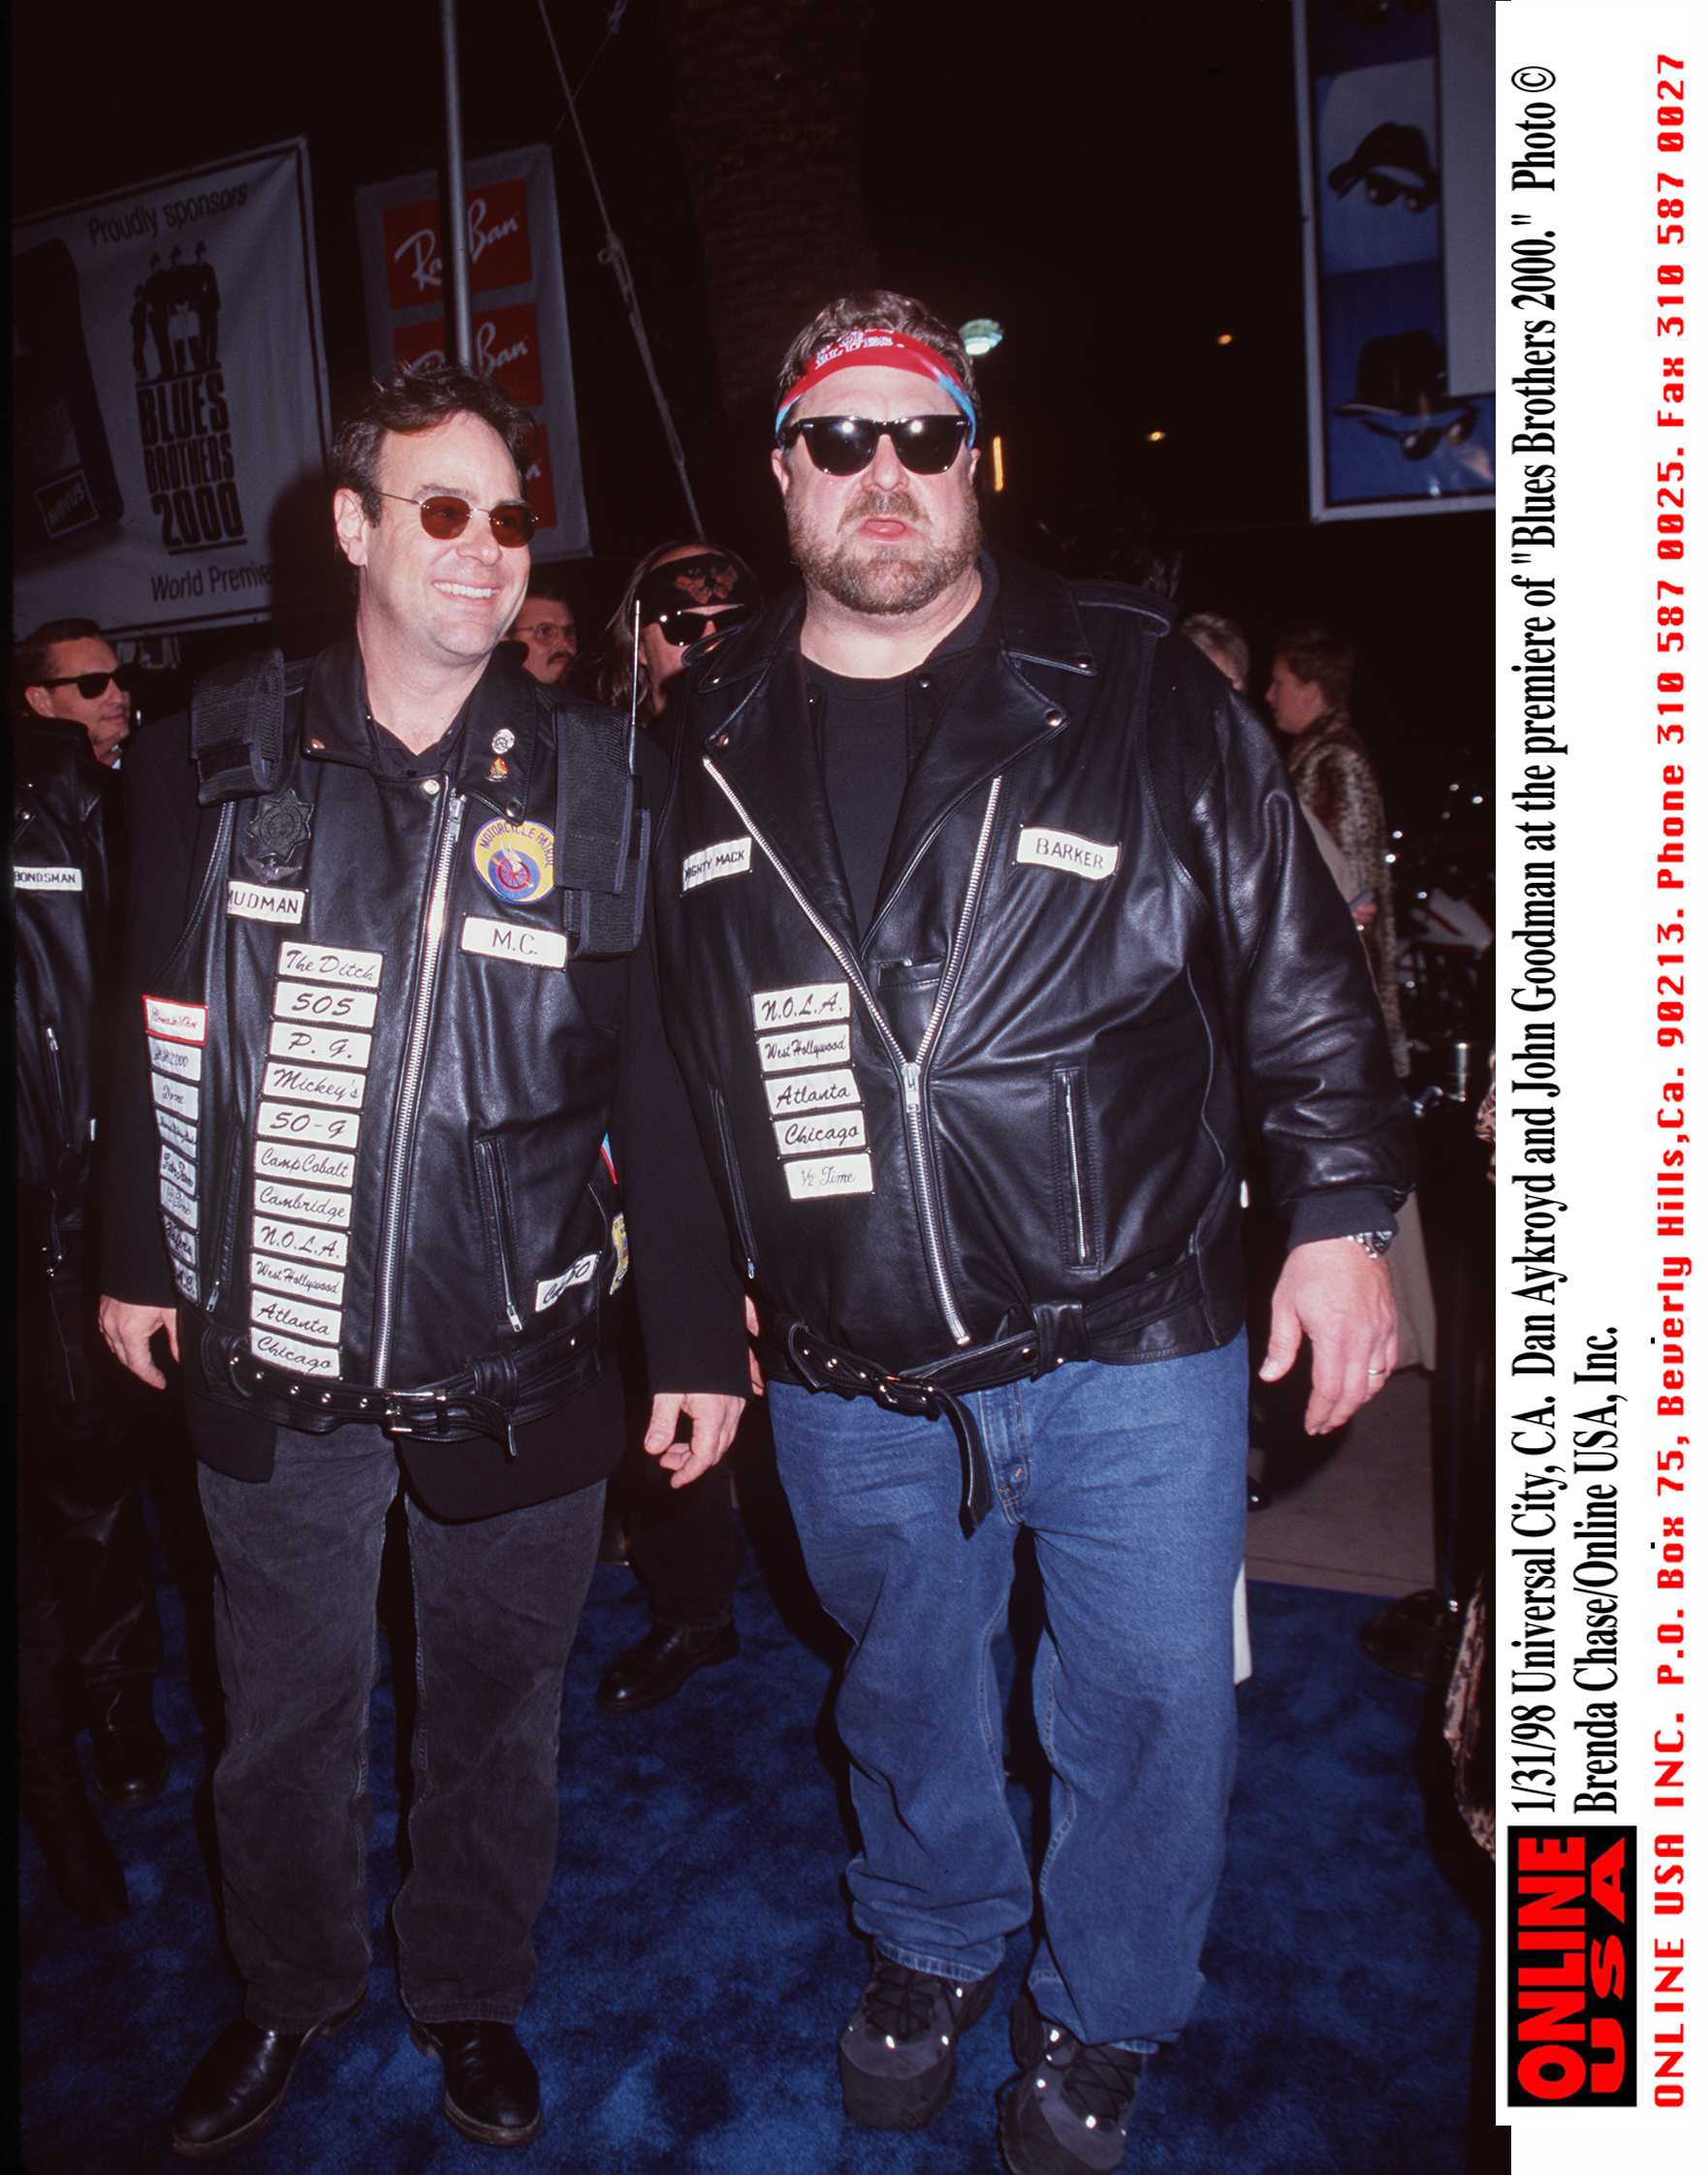 Dan Aykroyd and John Goodman attend the premiere of "Blues Brothers 2000" | Photo: Getty Images